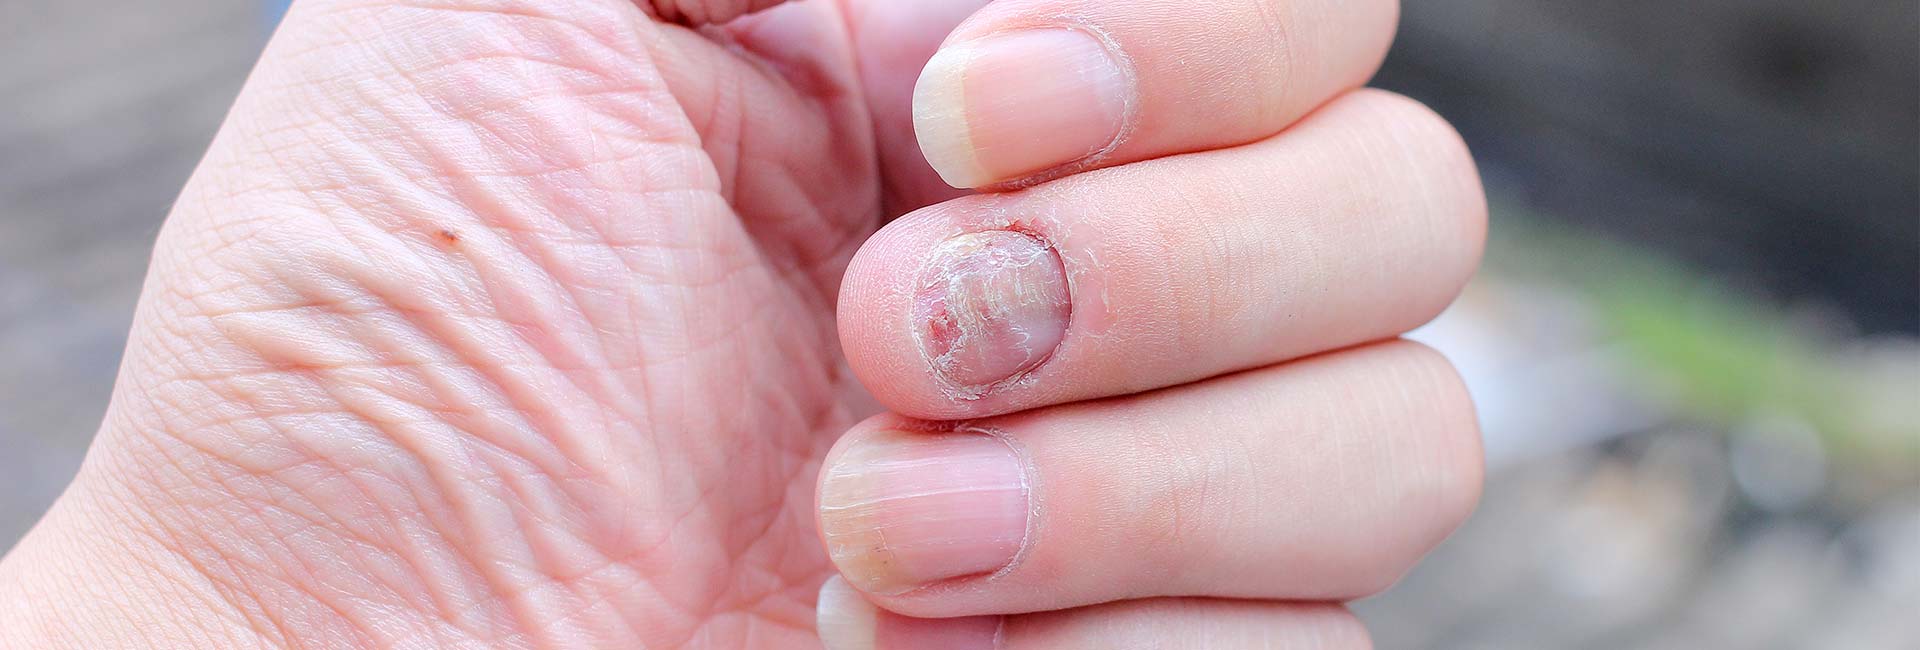 Fungus Infection on Nails Hand, Finger with onychomycosis.